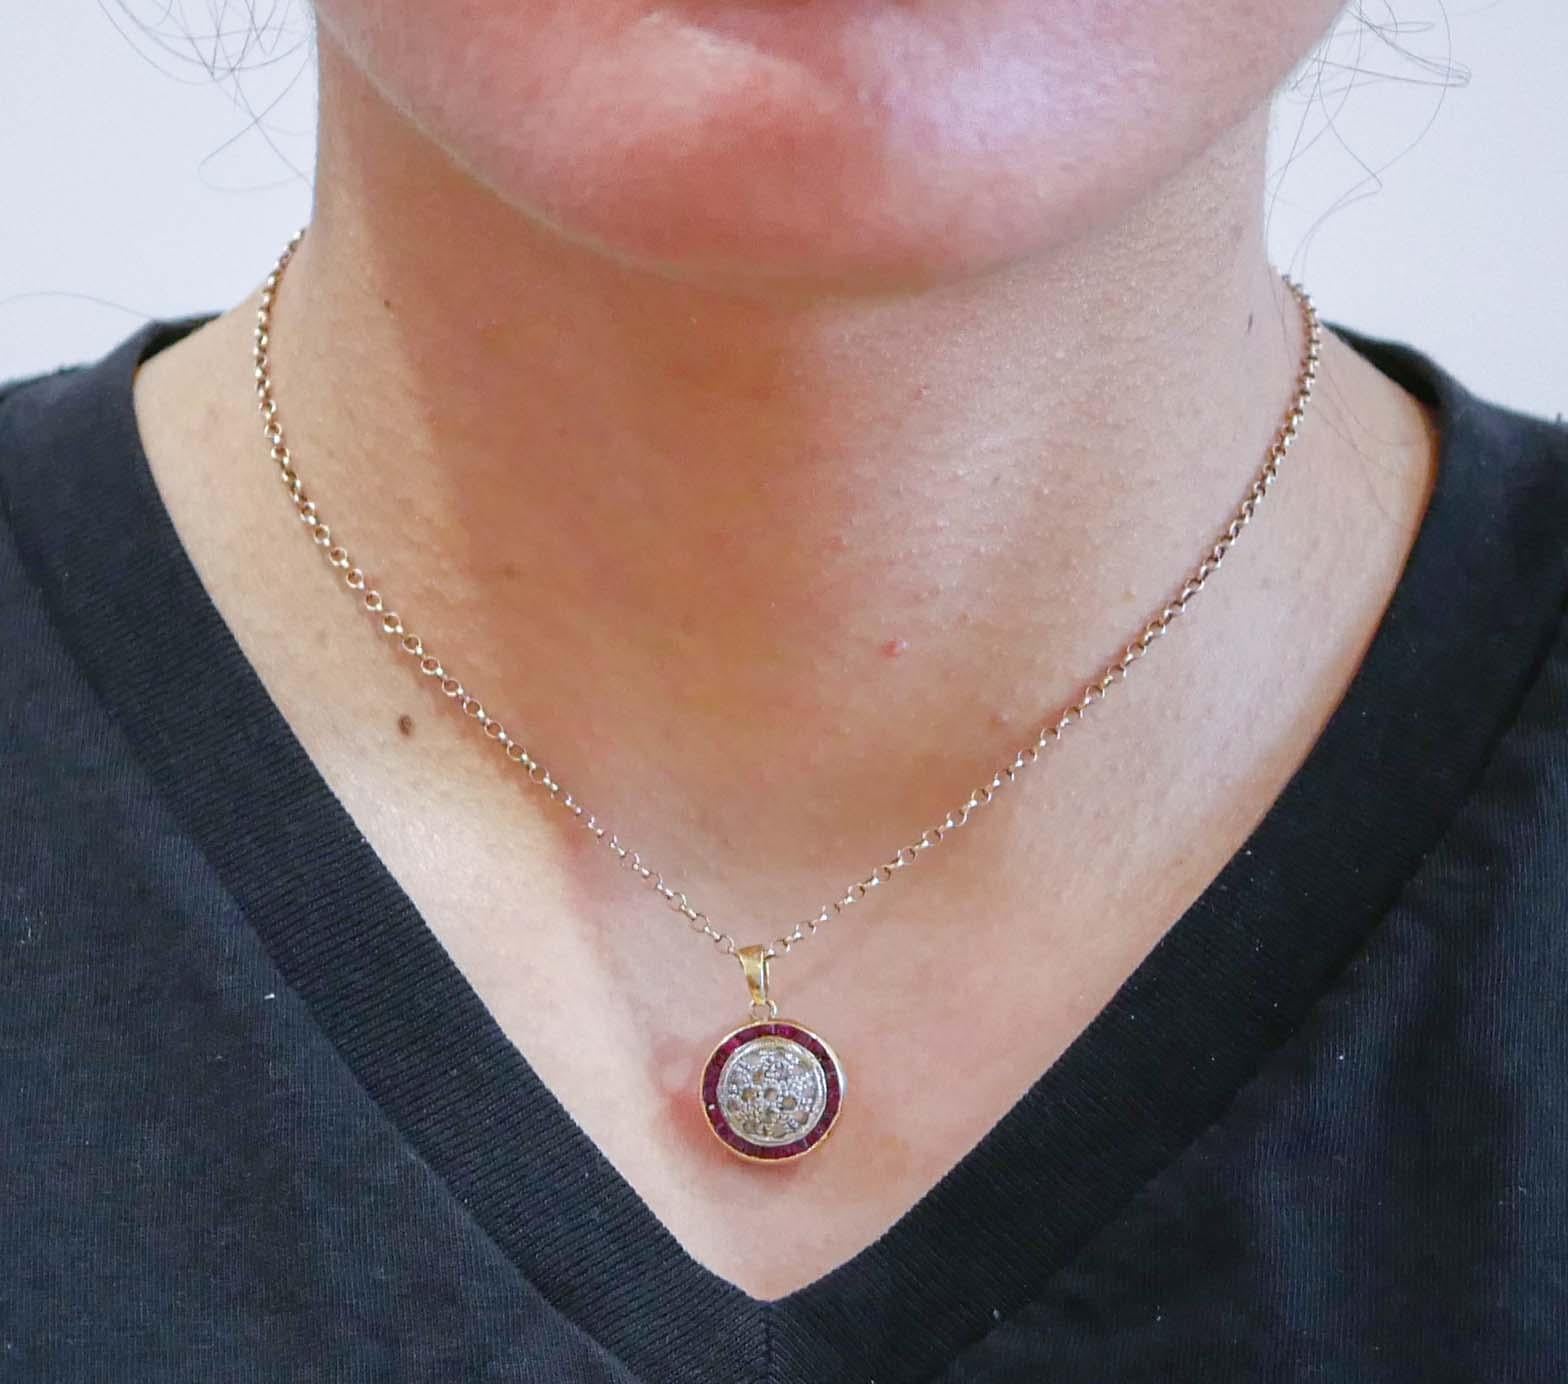 Women's Rubies, Diamonds, Rose Gold and Silver Pendant Necklace.